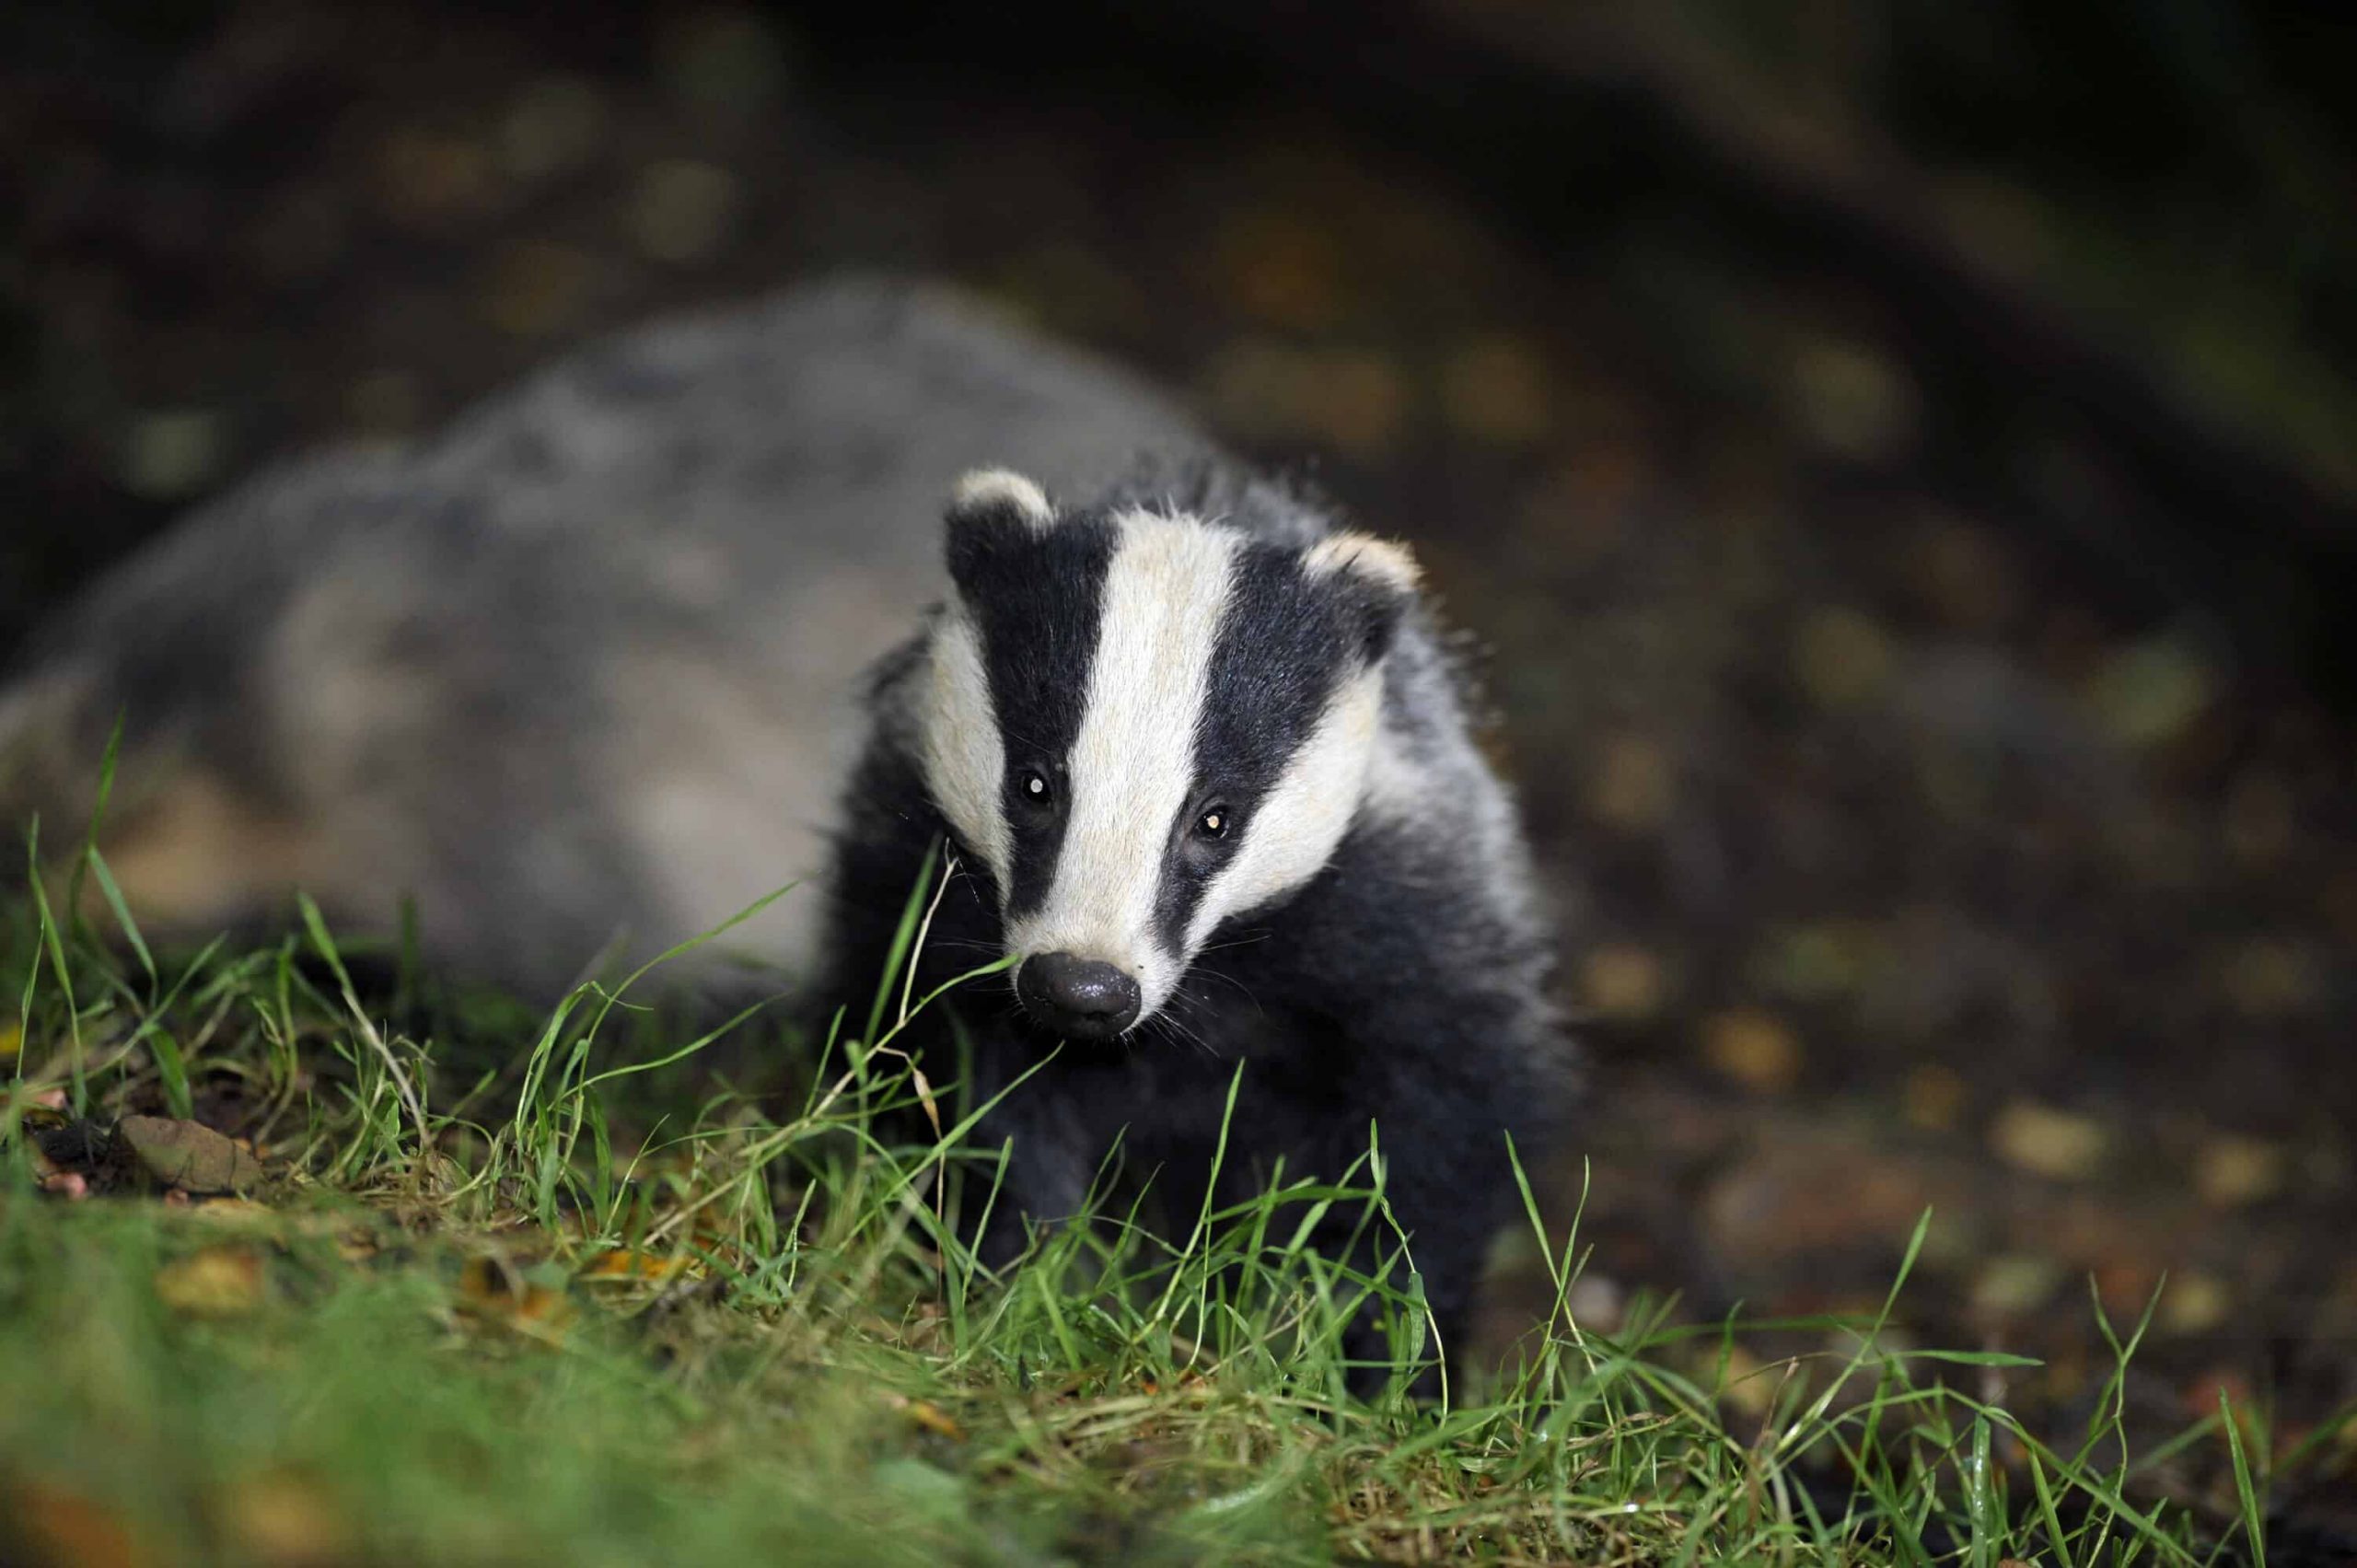 Concern over potential badger cull in areas where vaccination scheme in place